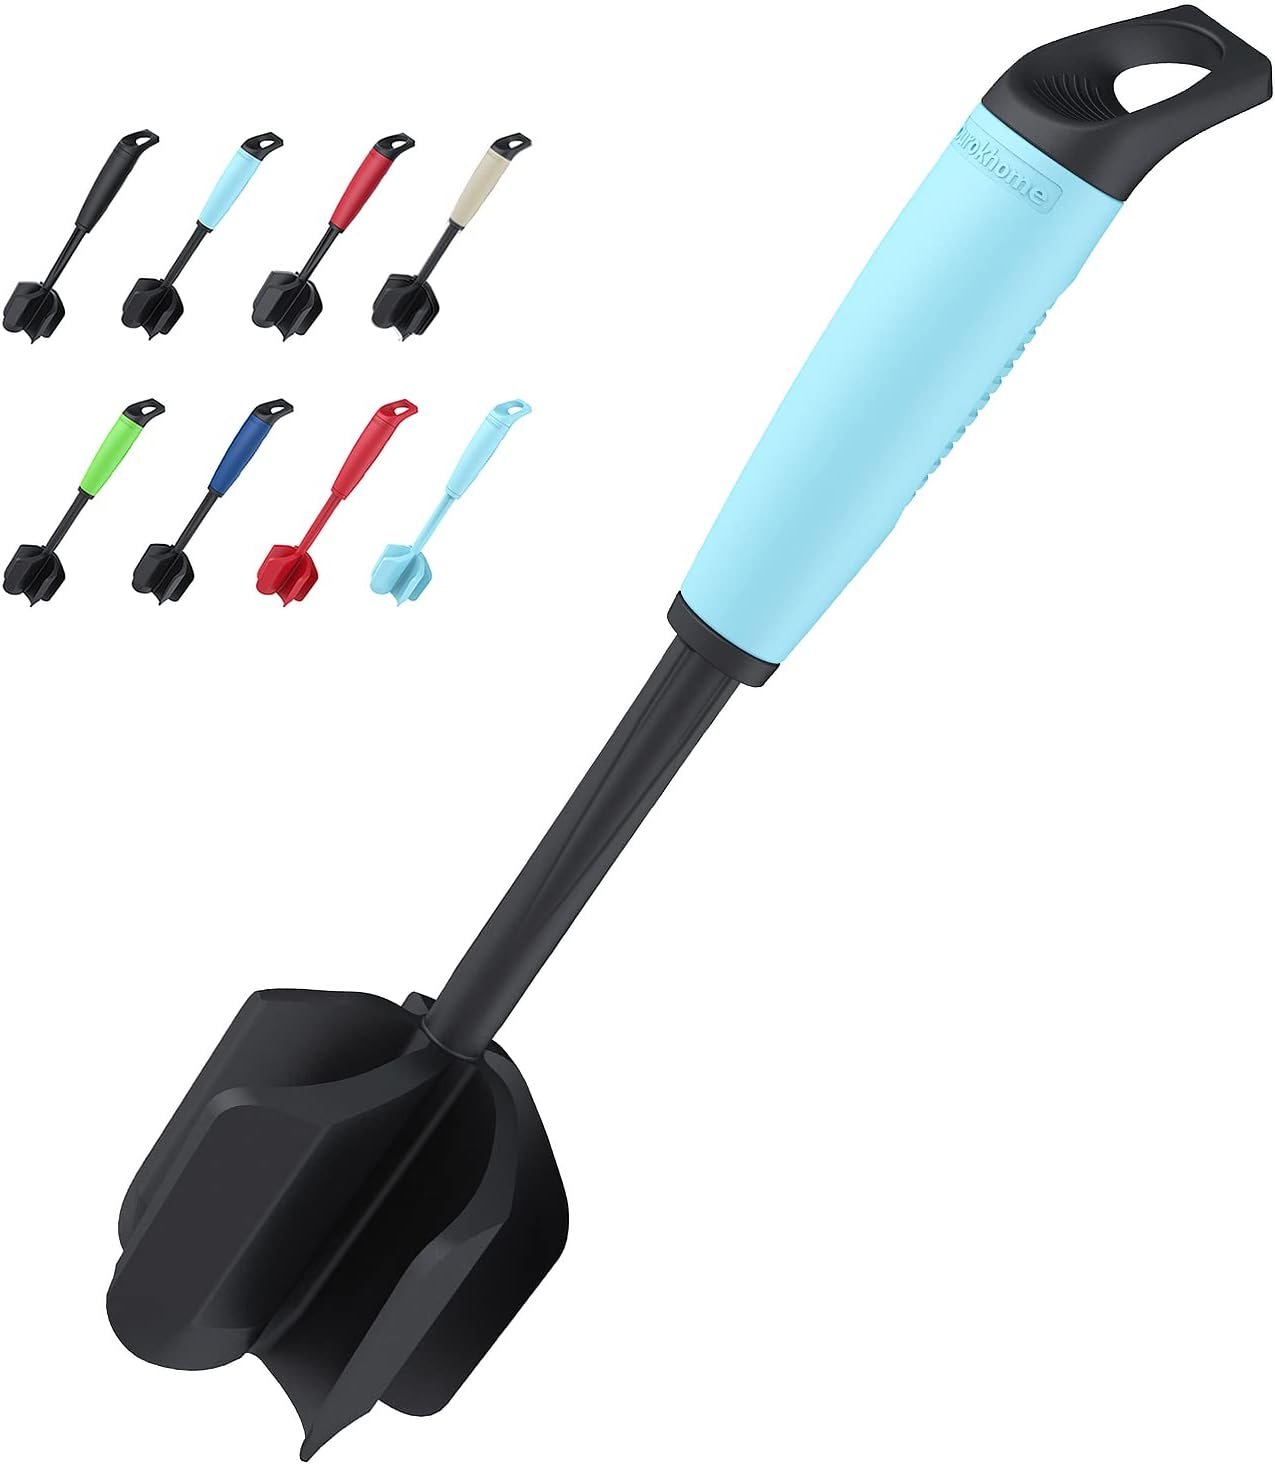 Ourokhome Potato Masher Meat Smasher, Heat Resistant Ground Beef Chopper, Multifunction Kitchen Gadgets for Hamburger Meat, Ground Turkey, Berries, Tomato, Egg Salad and More, Teal